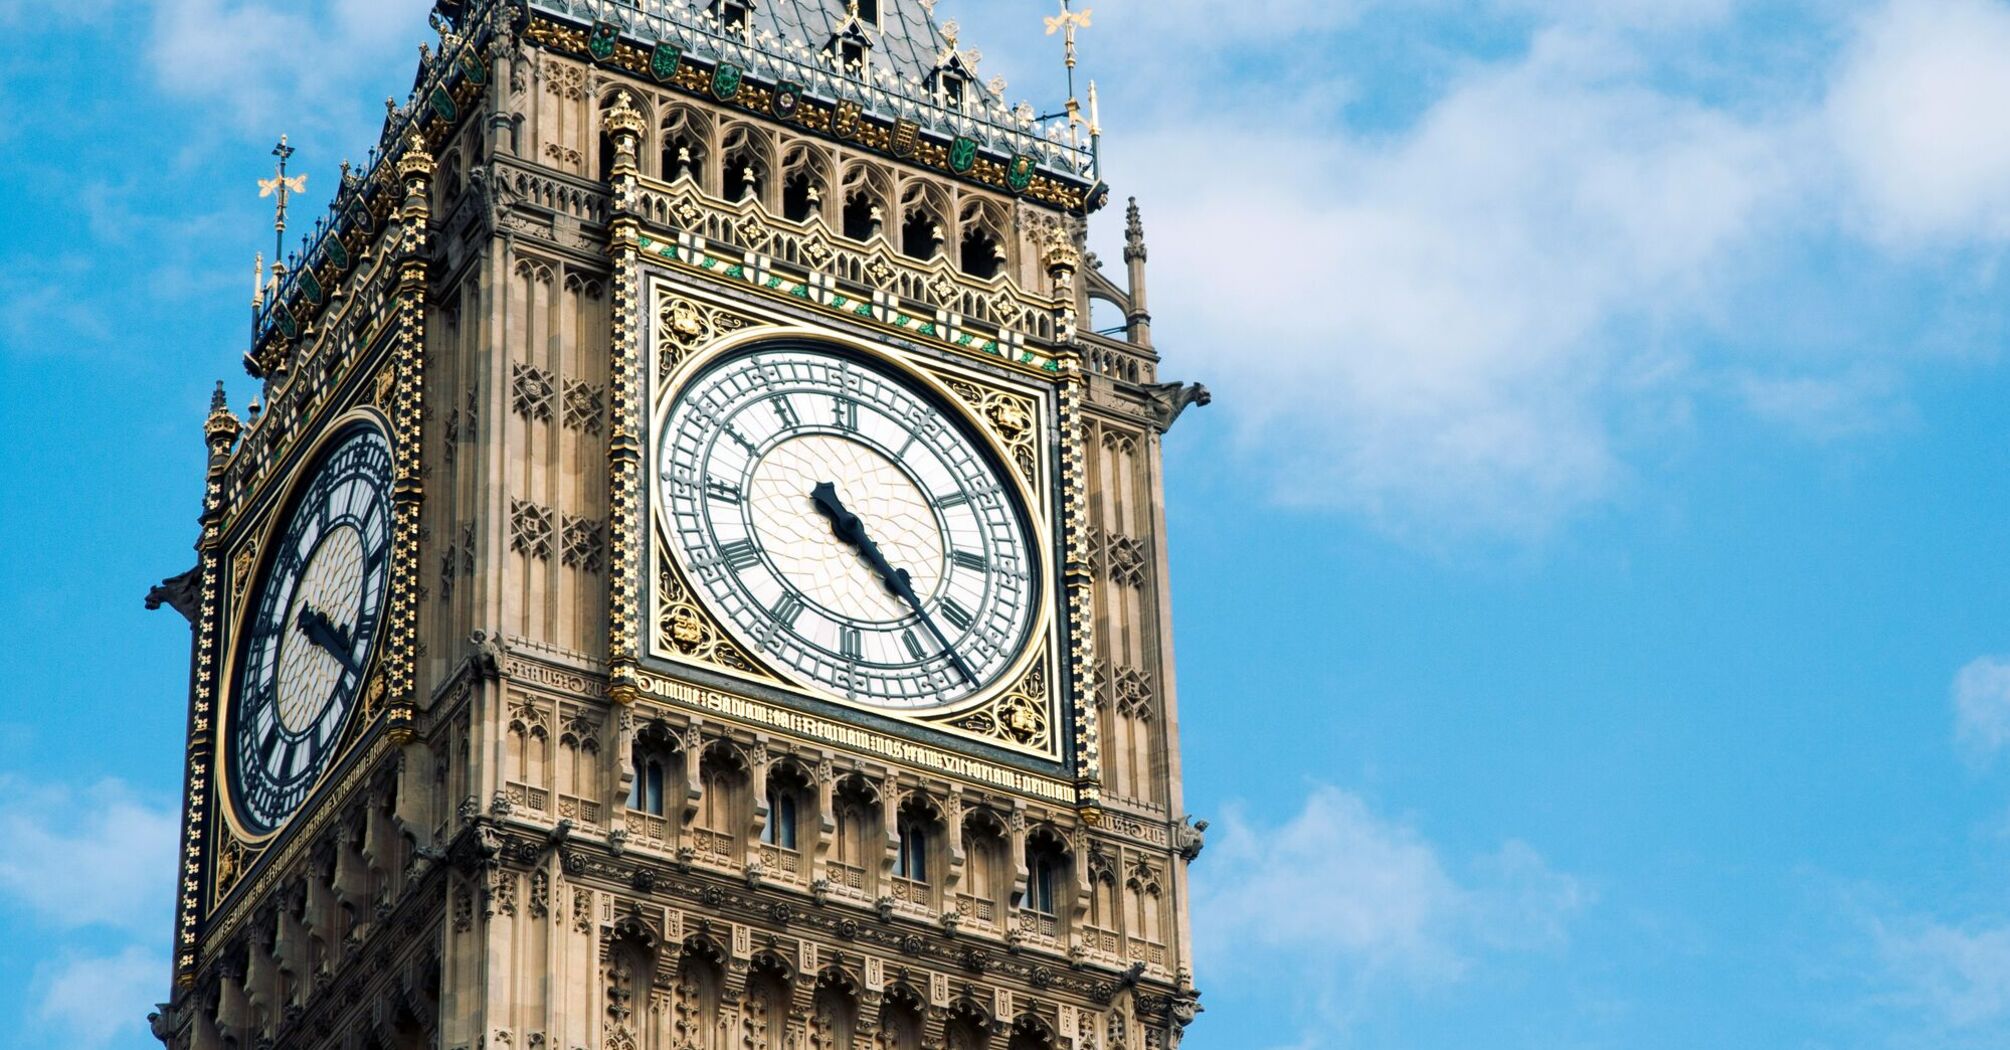 The iconic Big Ben clock tower against a blue sky with white clouds